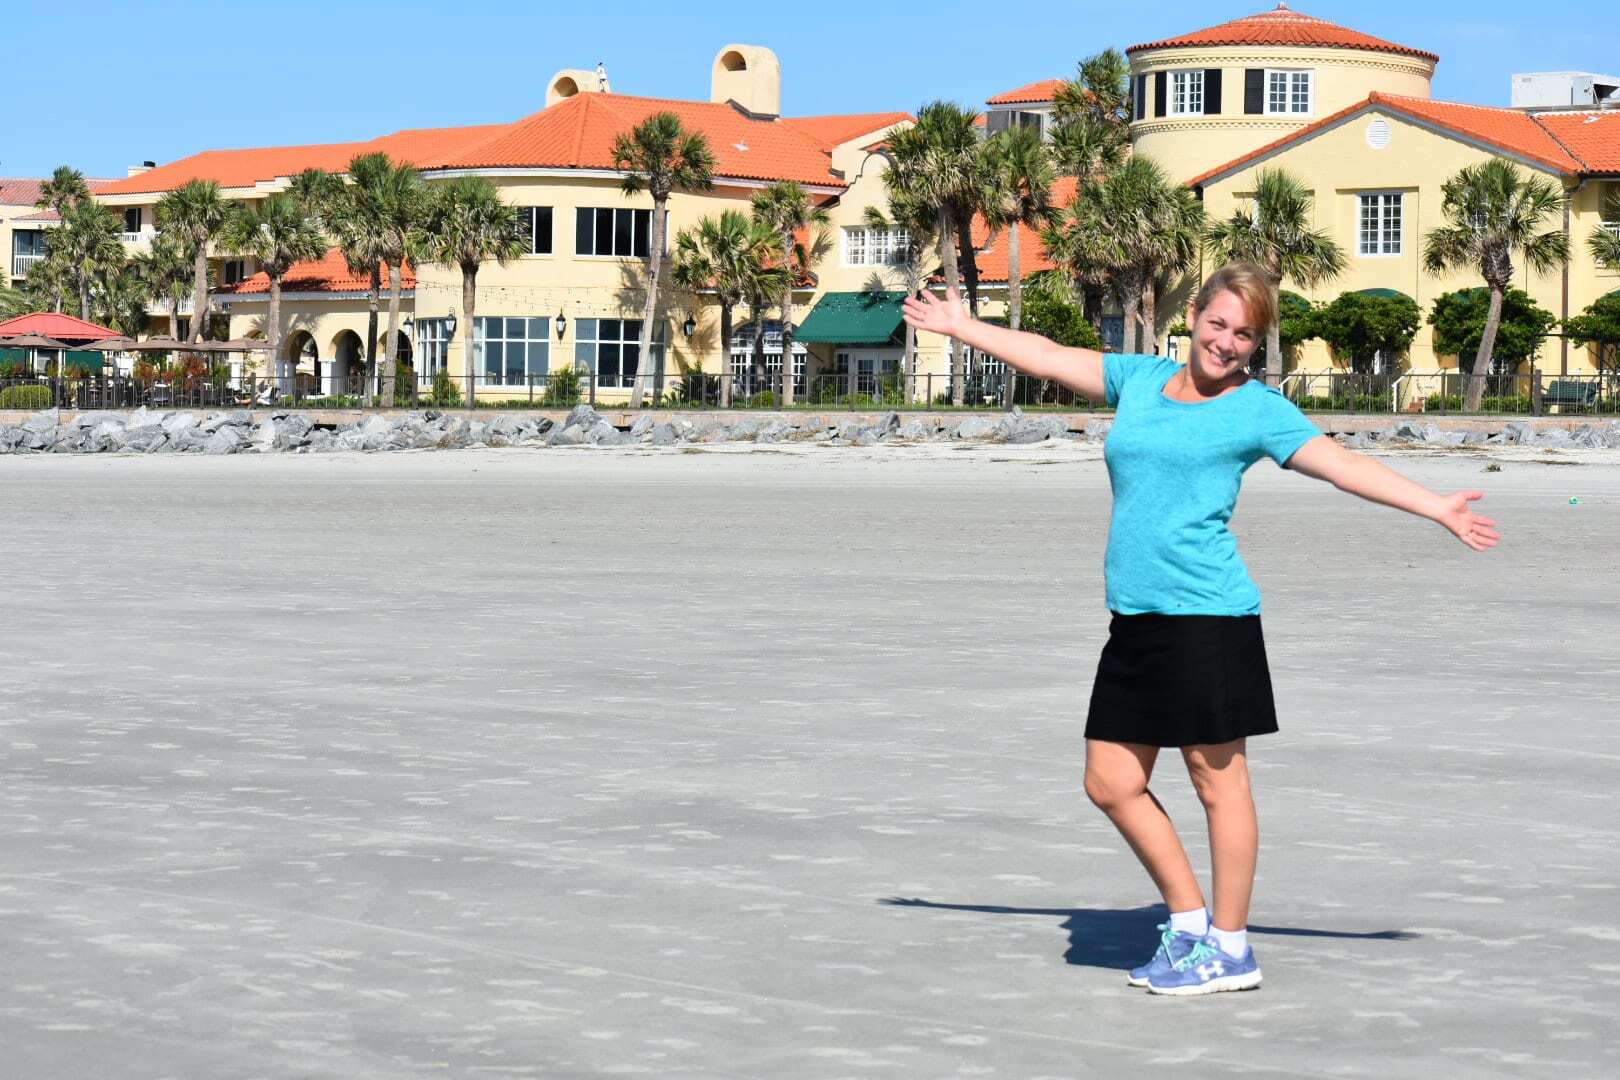 Travel Blogger Kathy Brown on the beautiful beaches of Saint Simon Island, Georgia. Standing infront of the massive resort complex of the historic King & Prince